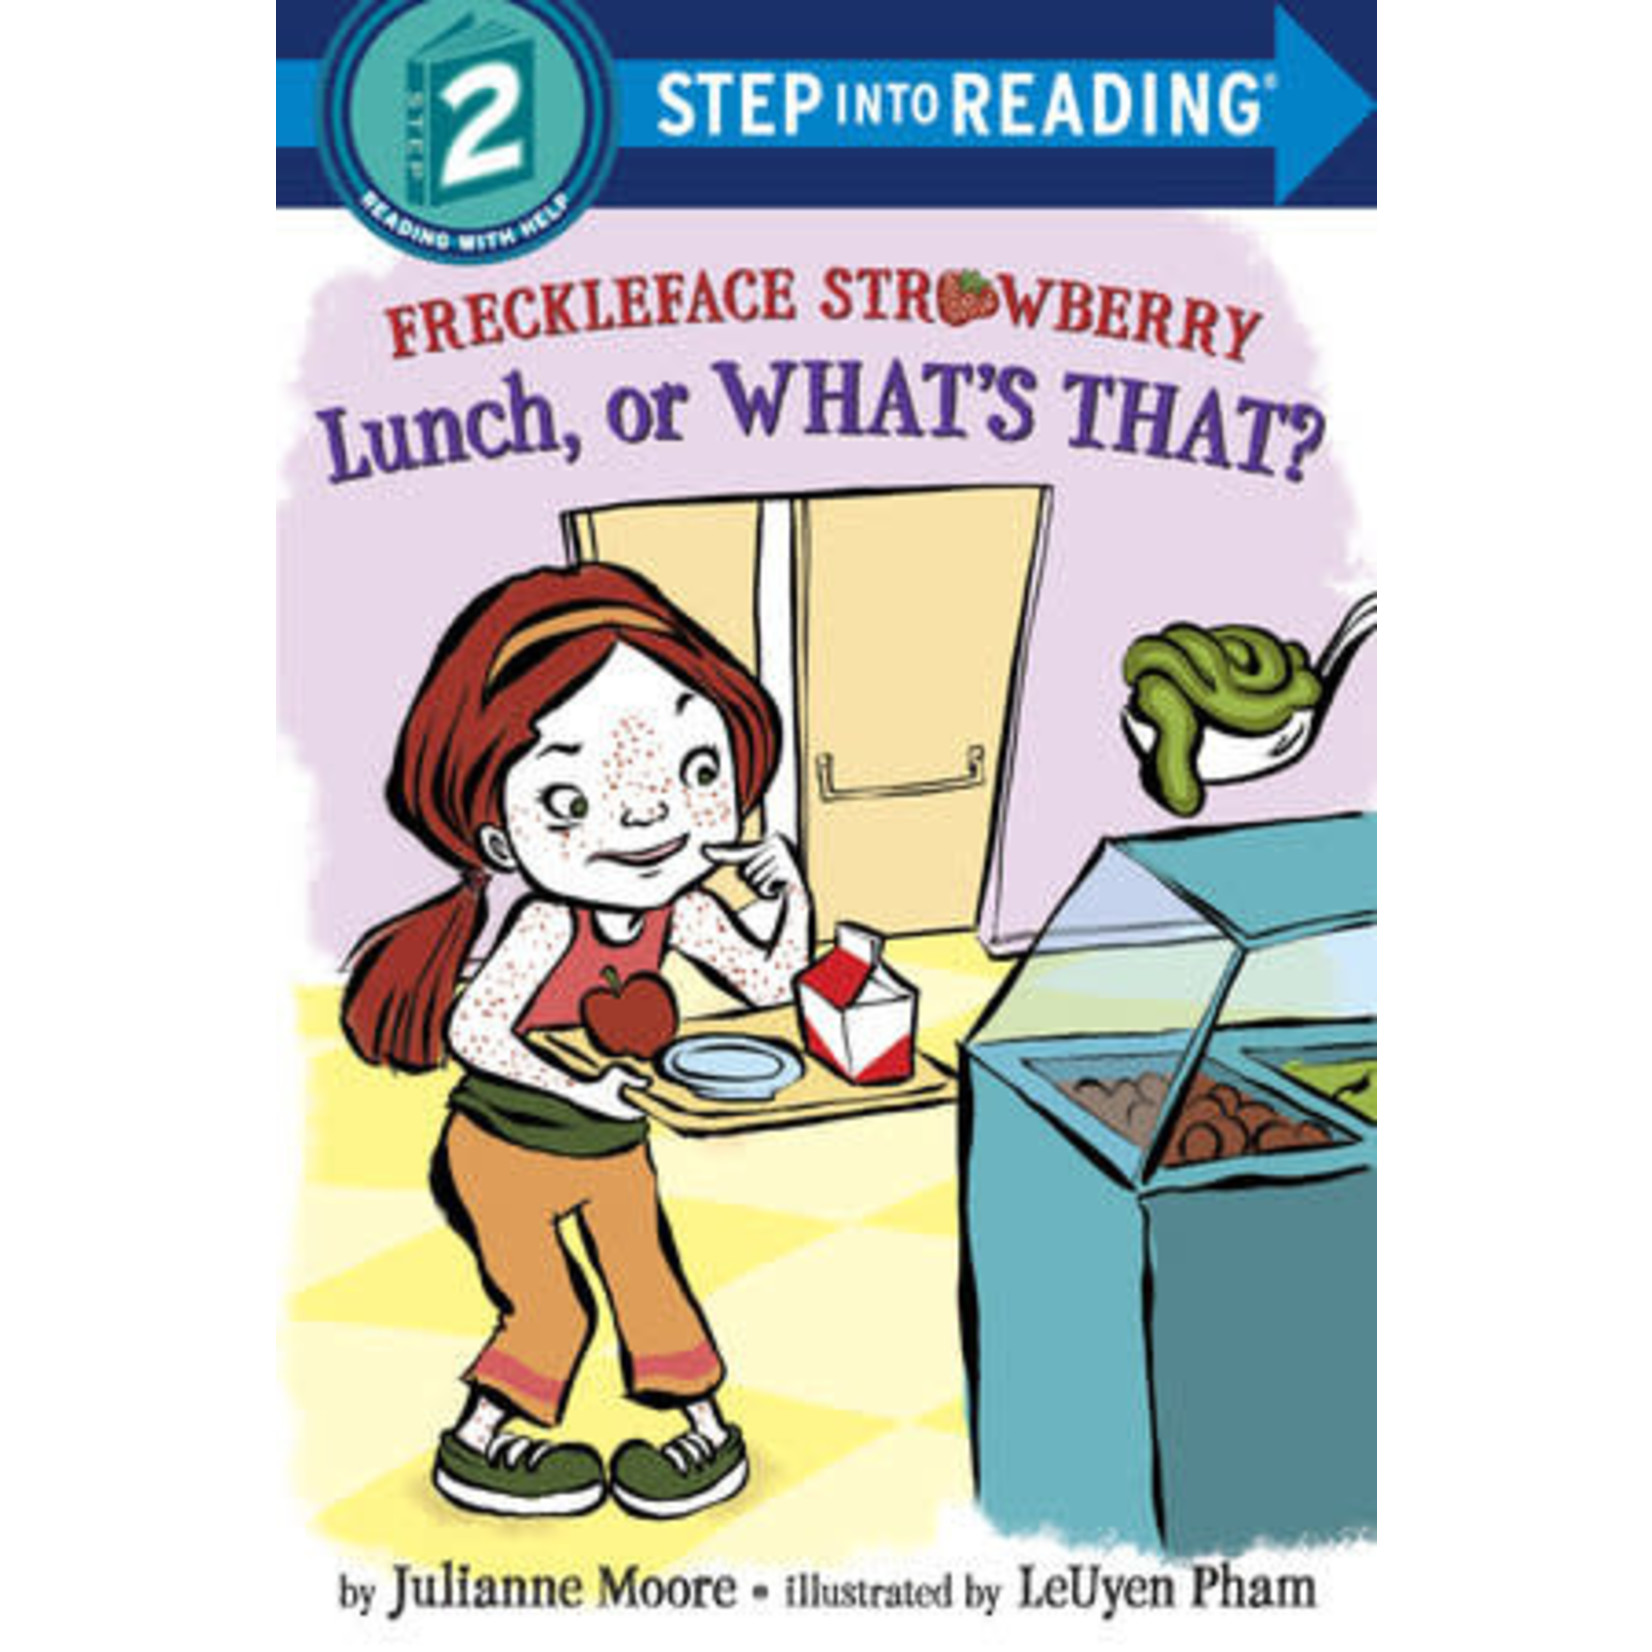 Step into Reading - Freckleface Strawberry - Lunch, or What's That? (level 2)